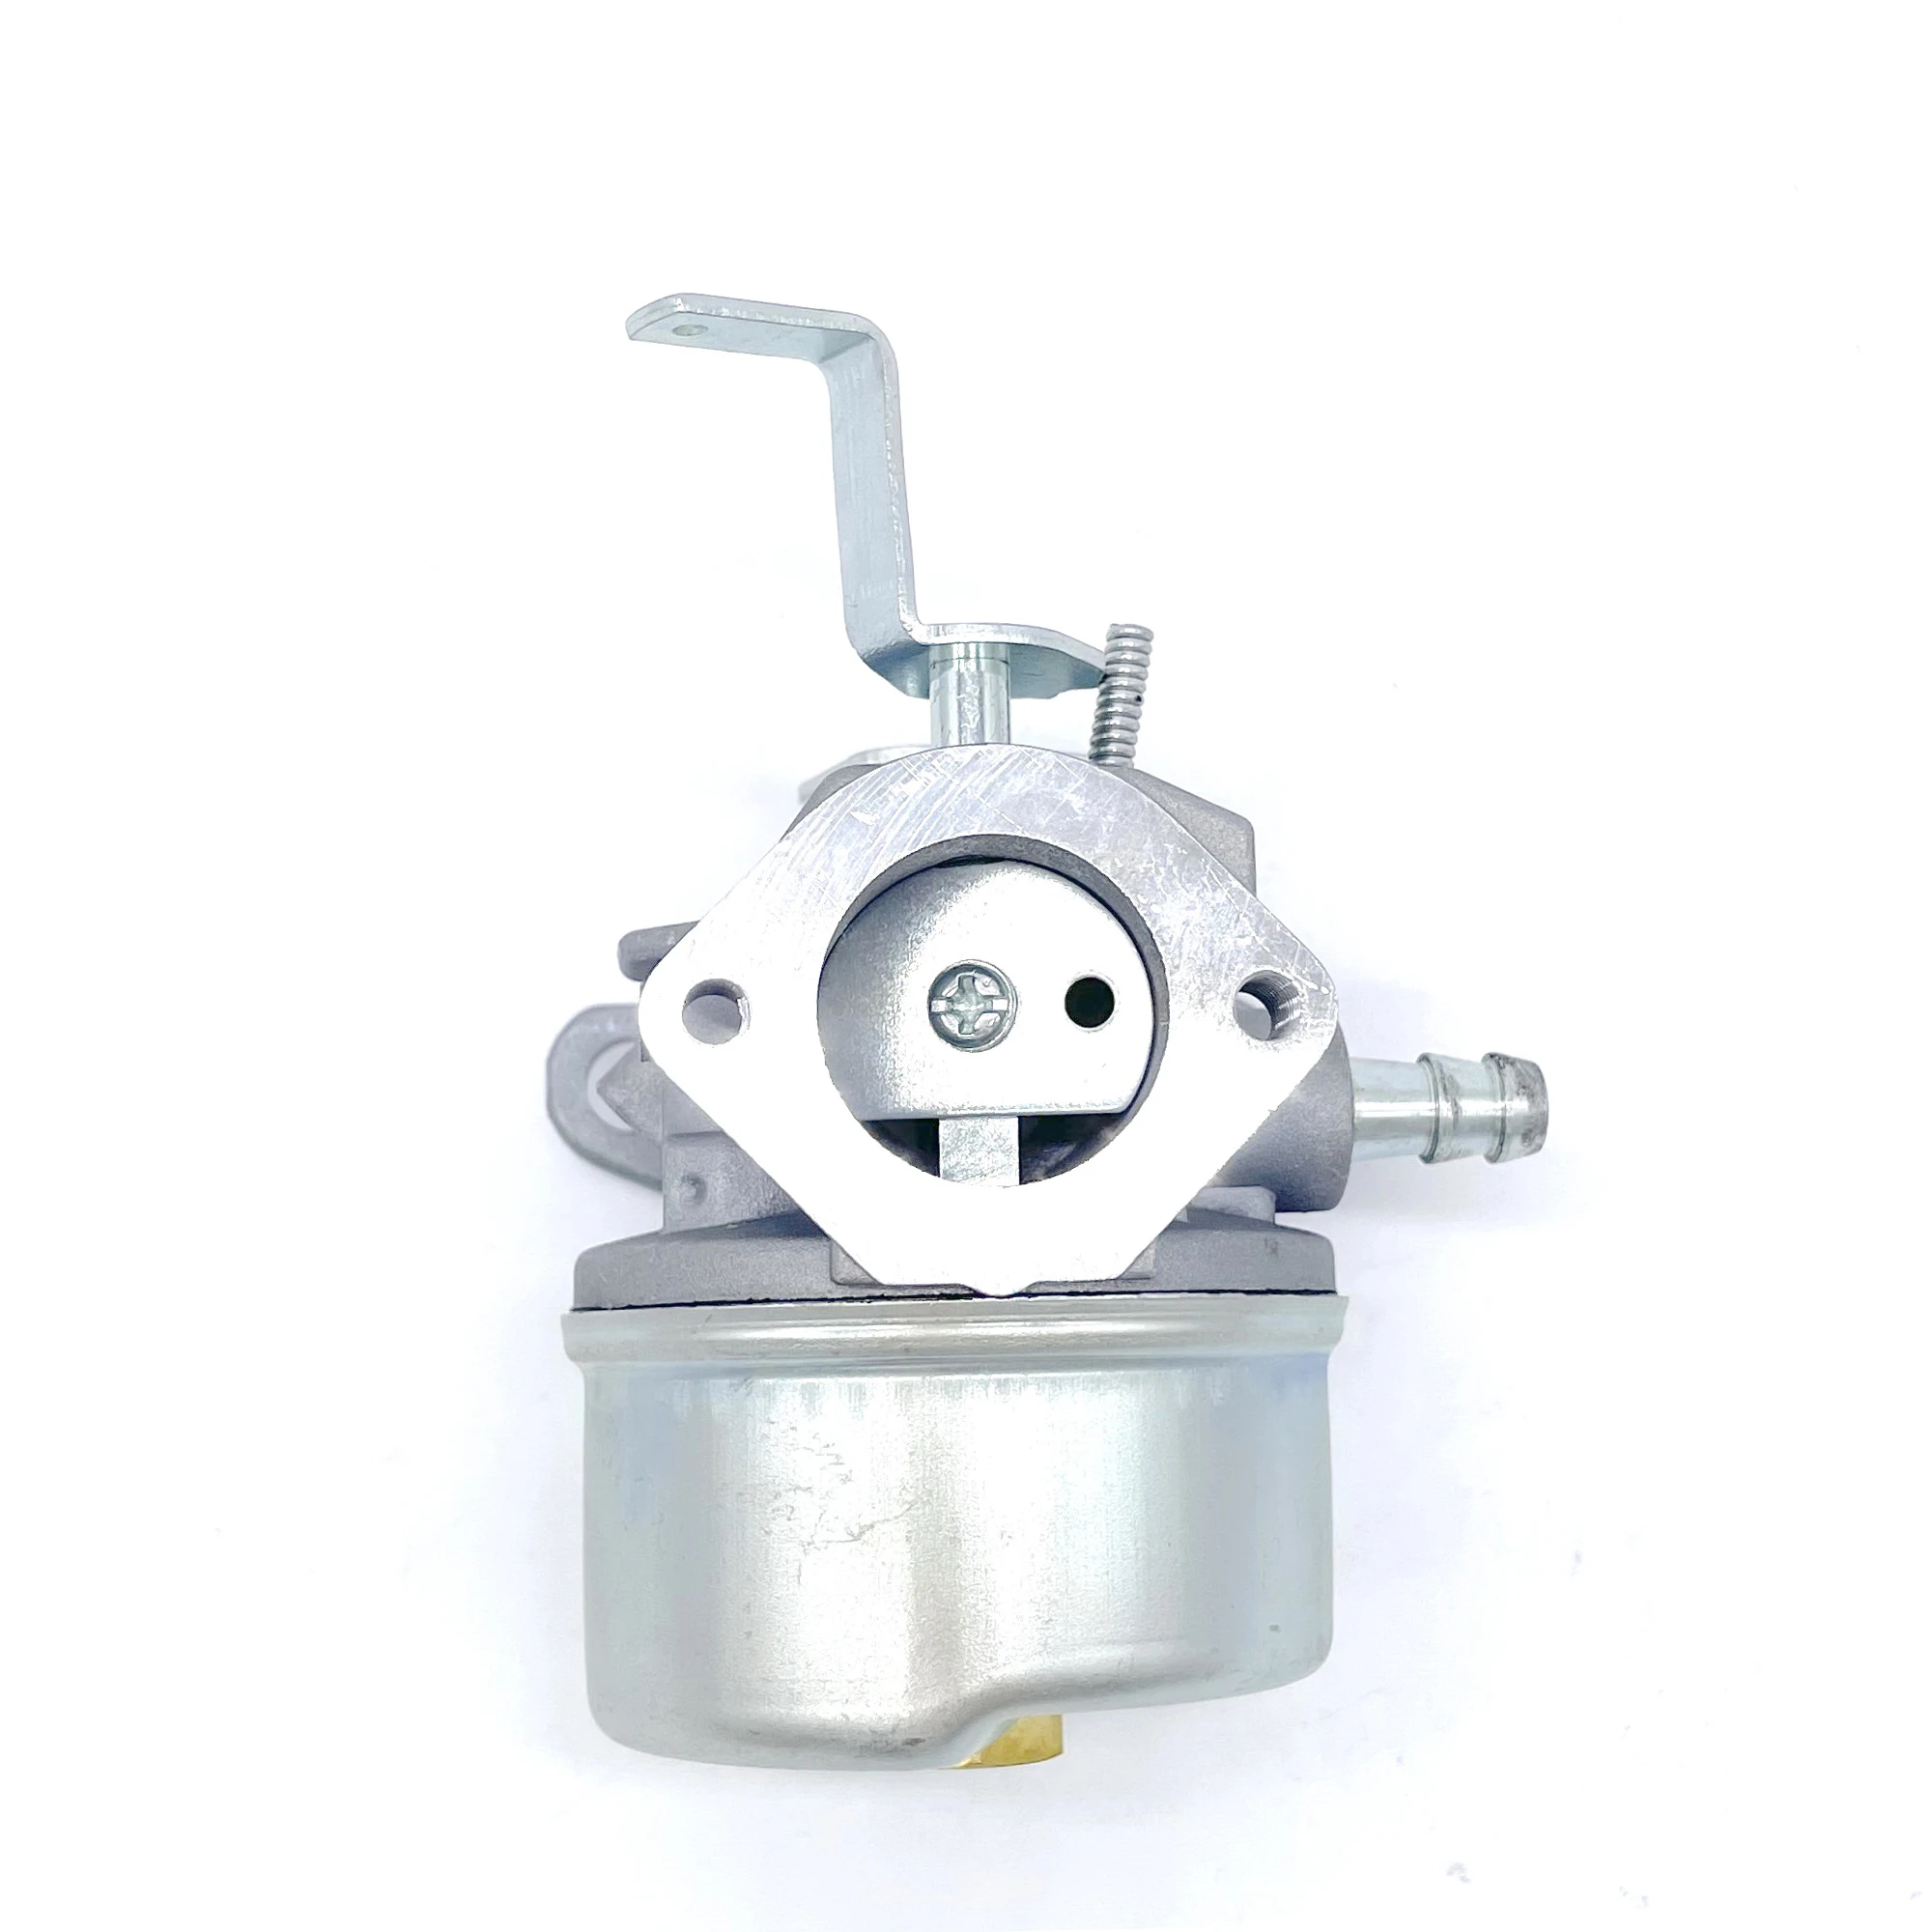 640300 Carburetor Compatible with Tecumseh HSK850 HSK870 TH139SA TH139SP Replaces 632738 640096 (11000000477035)